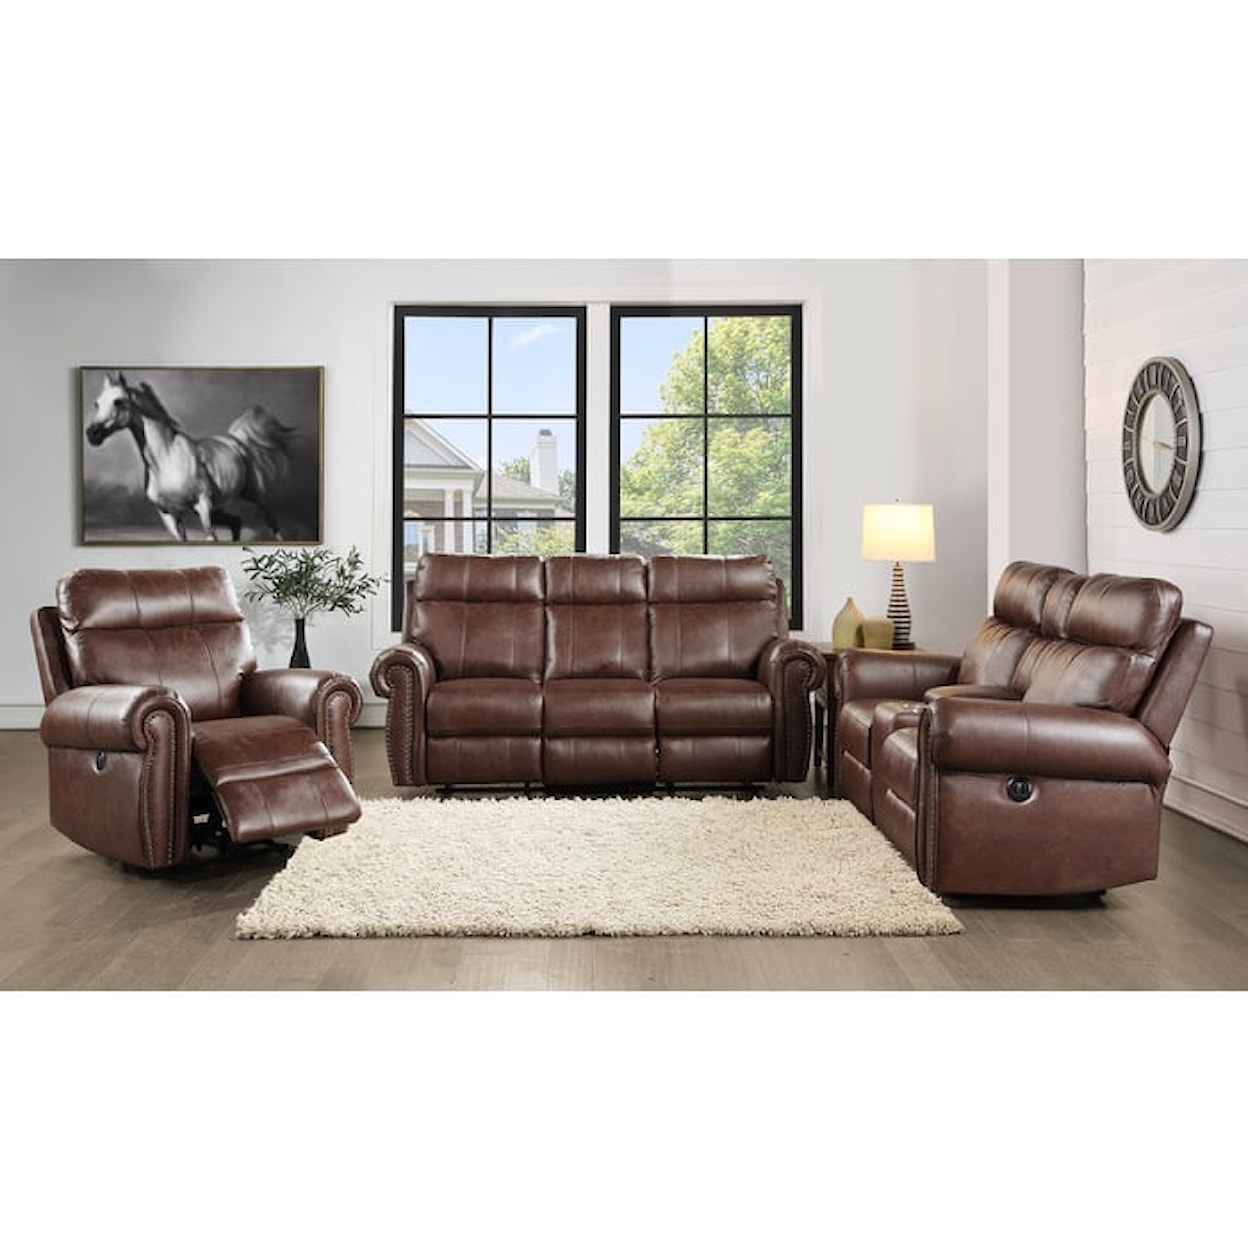 Homelegance Furniture Granville Double Reclining Sofa